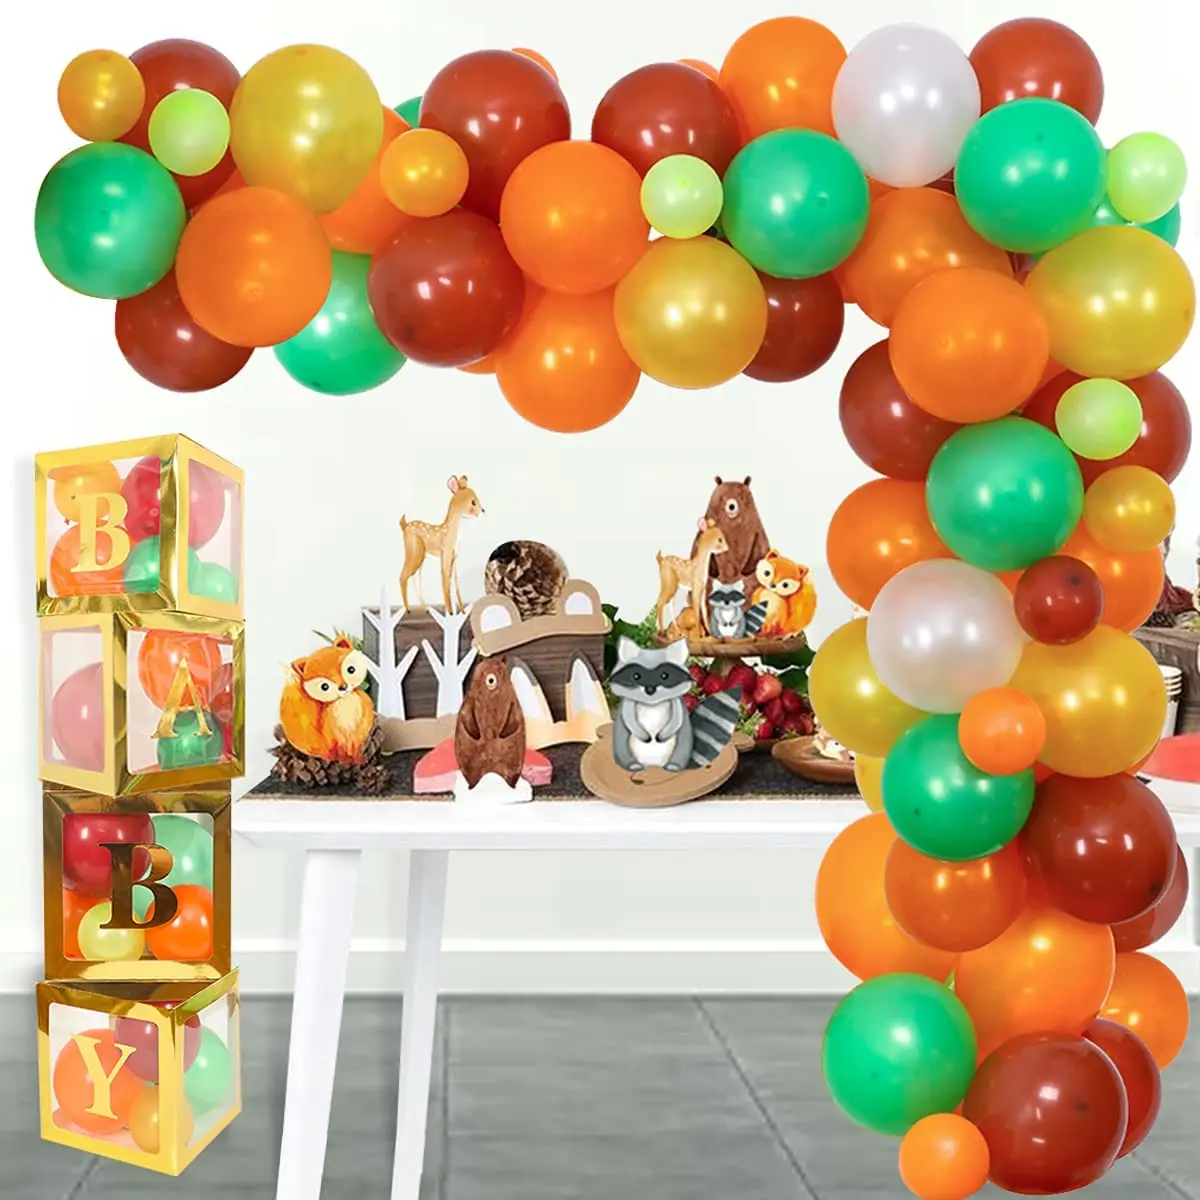 

Woodland Baby Shower Decorations Balloon Garland Arch Kit with Balloon Boxes for Boy Girl Gender Reveal Birthday Party Supplies